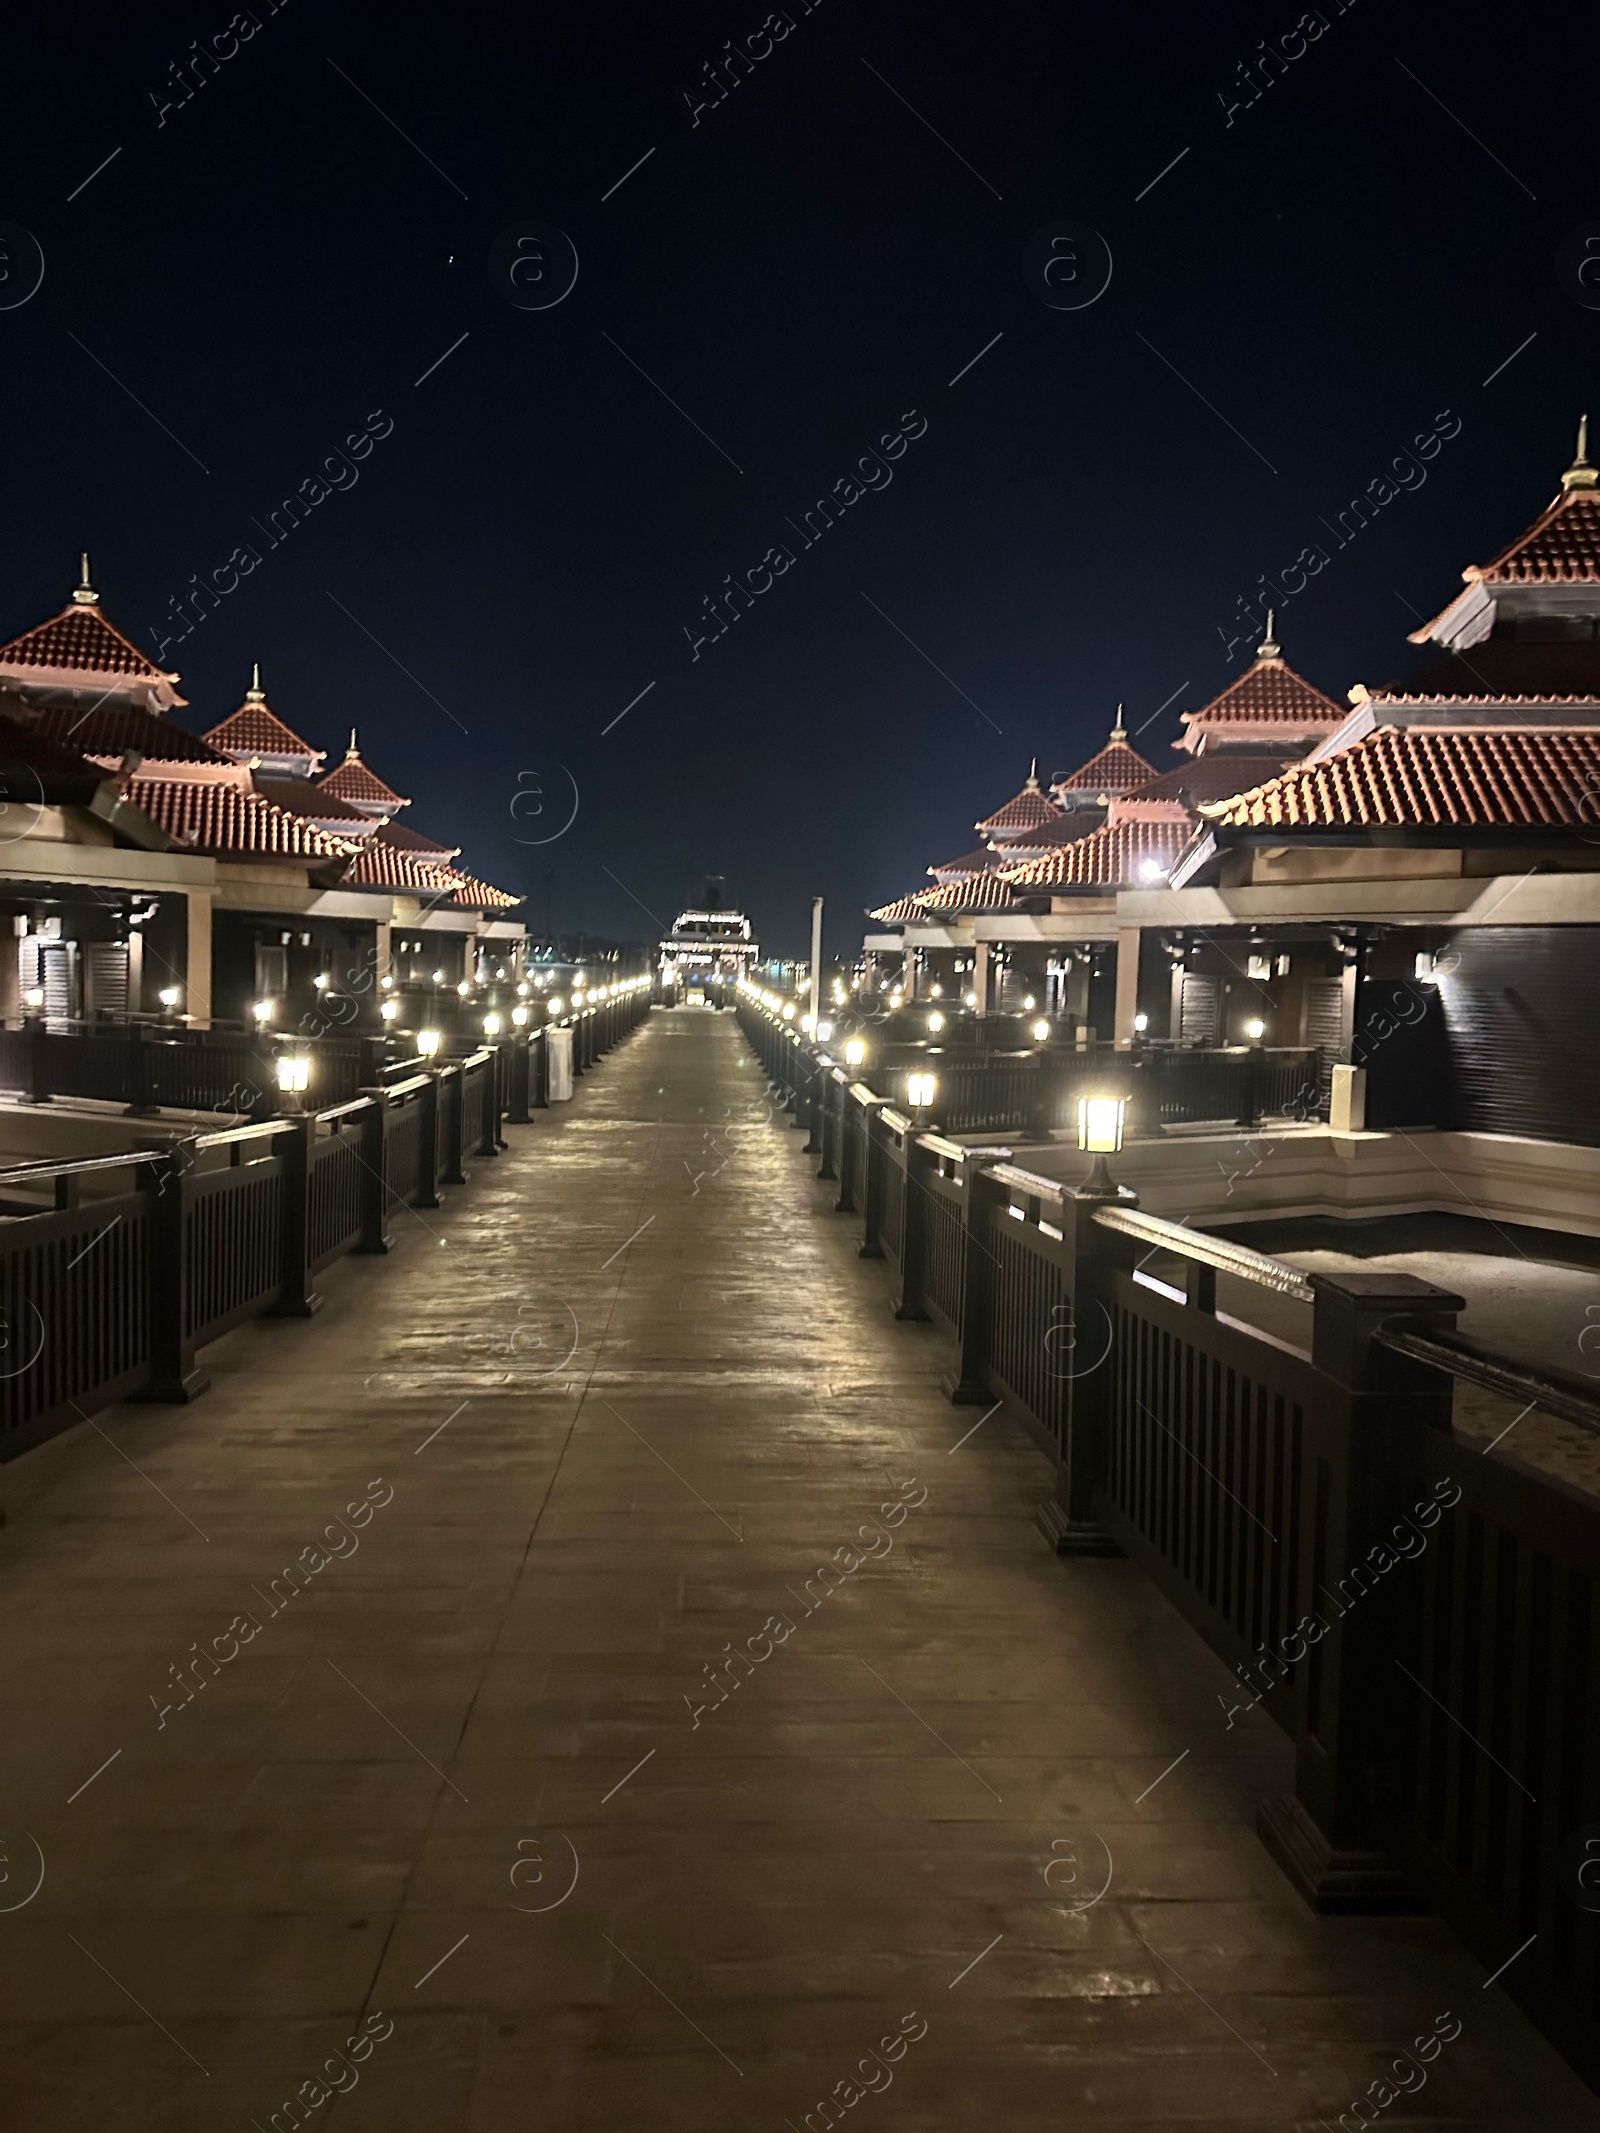 Photo of Paved pathway and buildings in city at night